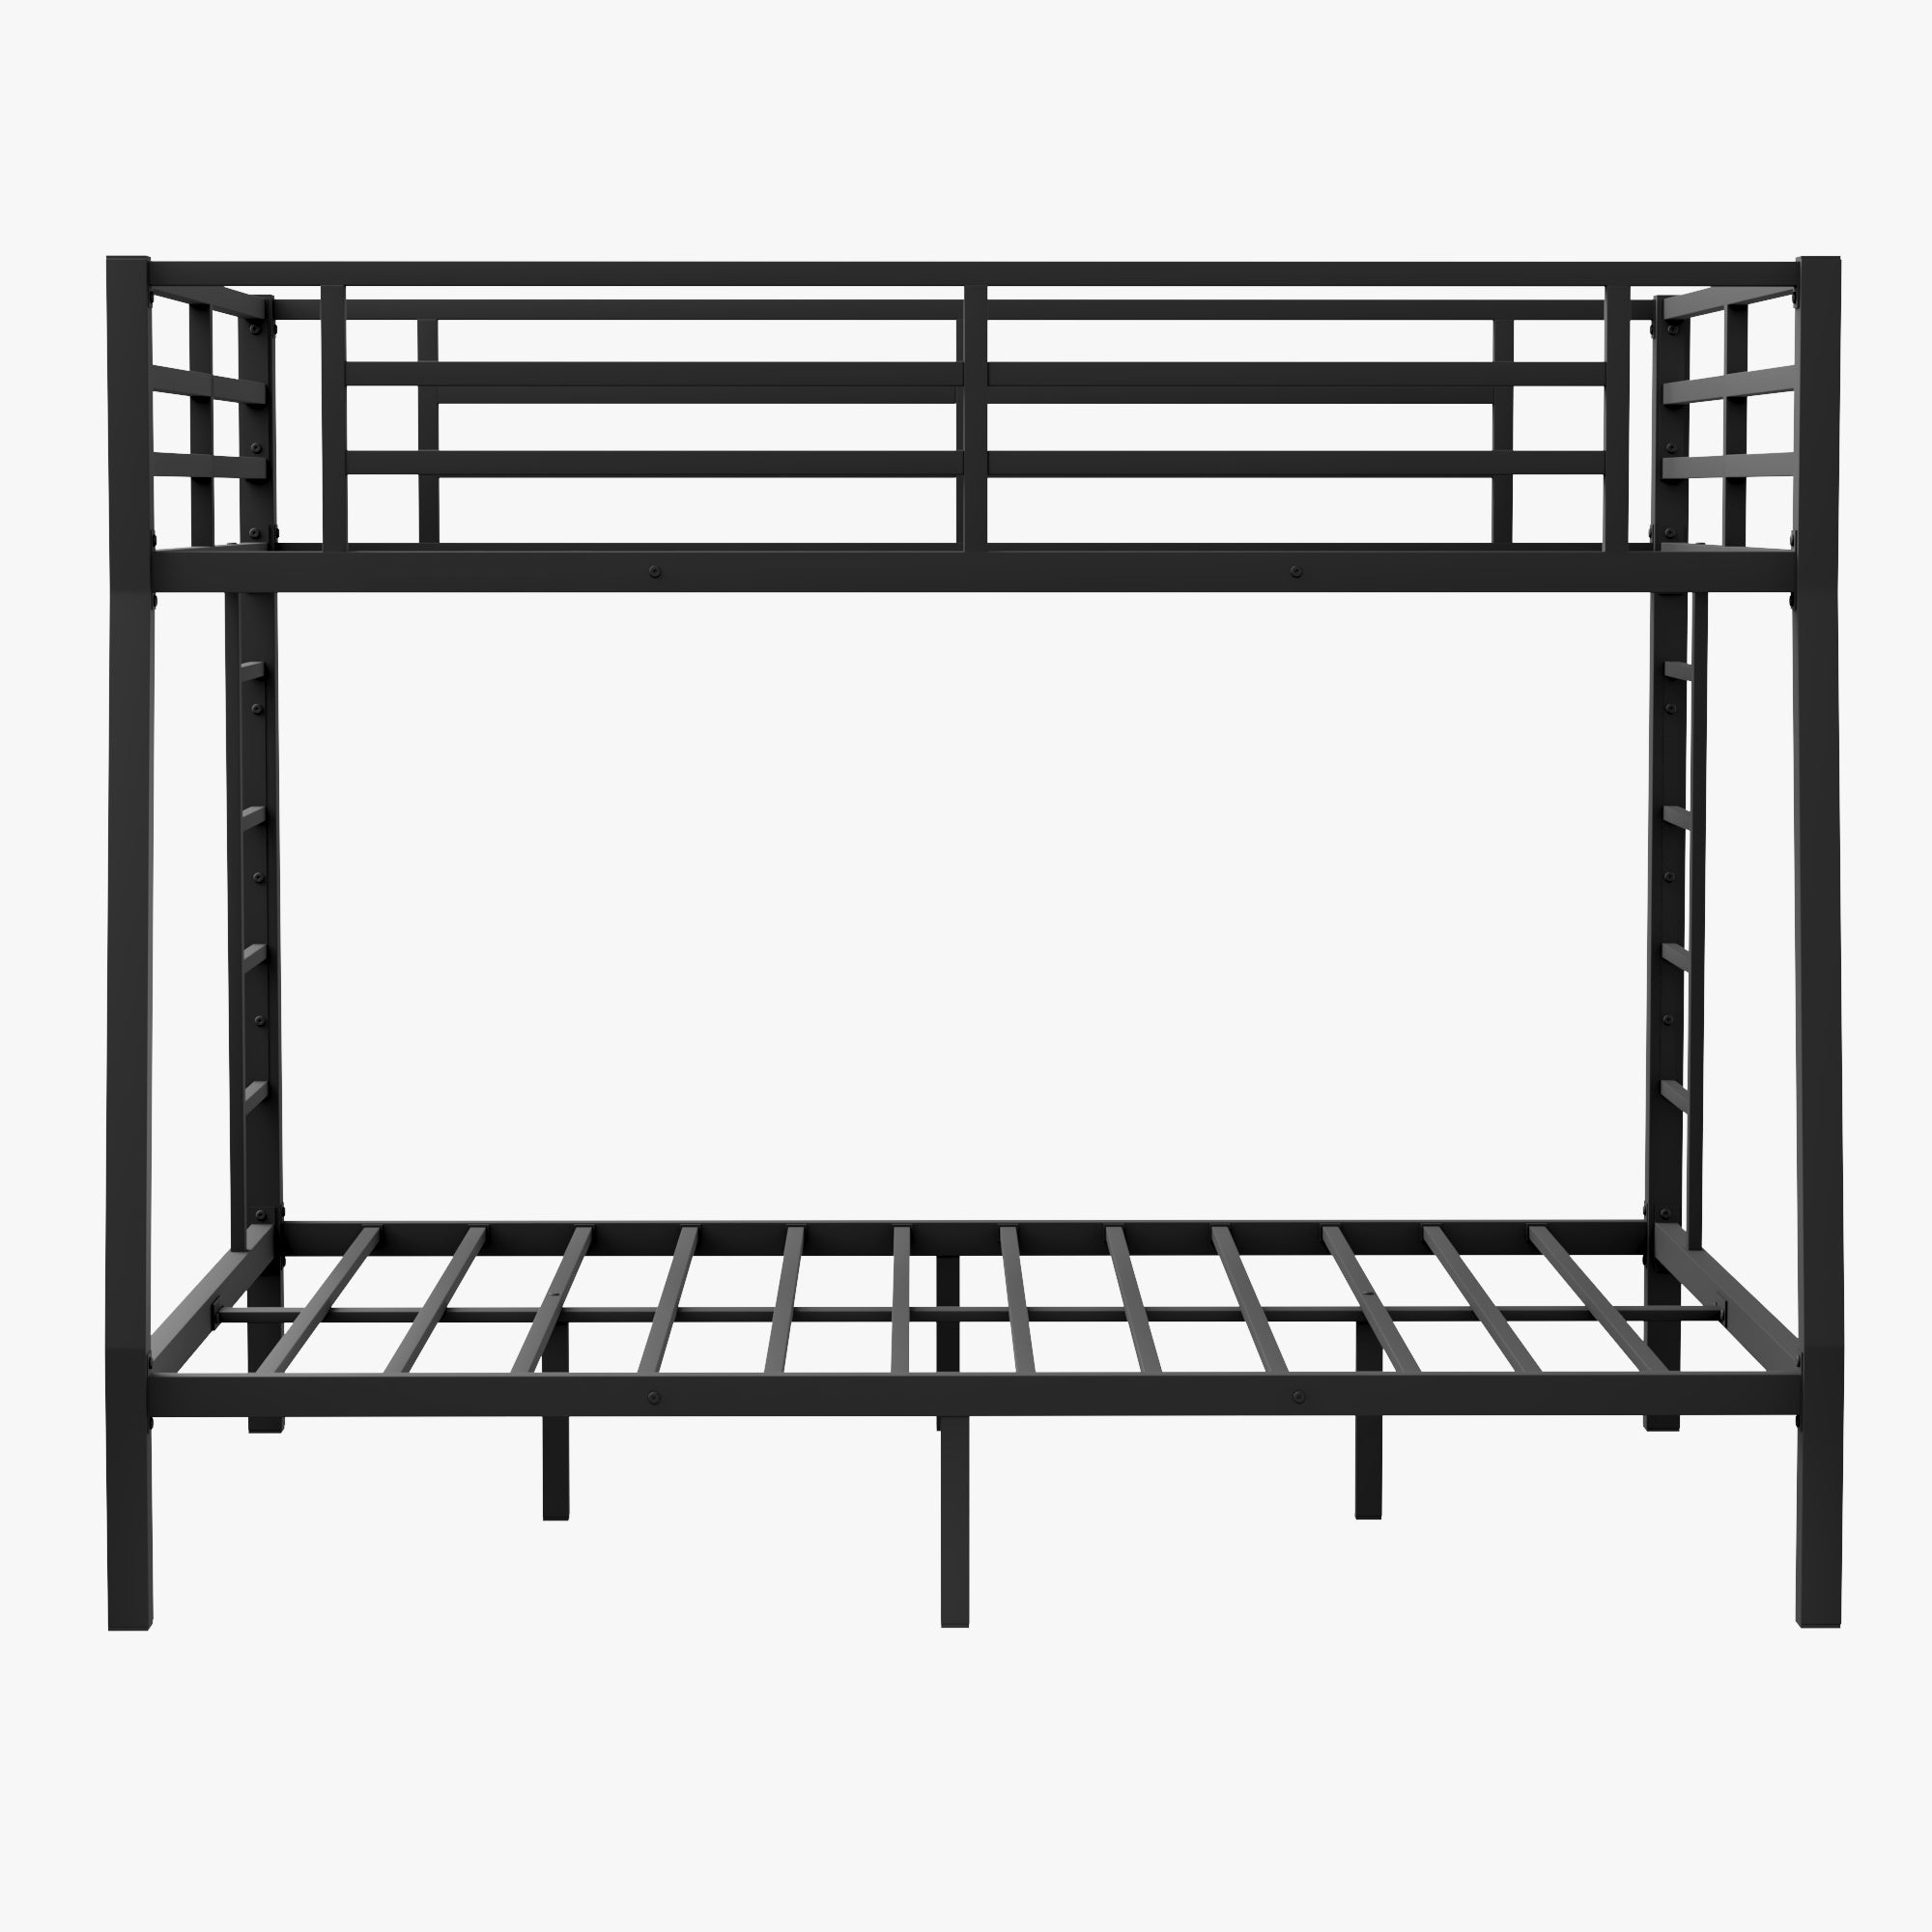 Metal Full XL Over Queen Bunk Bed - Space-Saving, Noise-Free, Teens & Adults